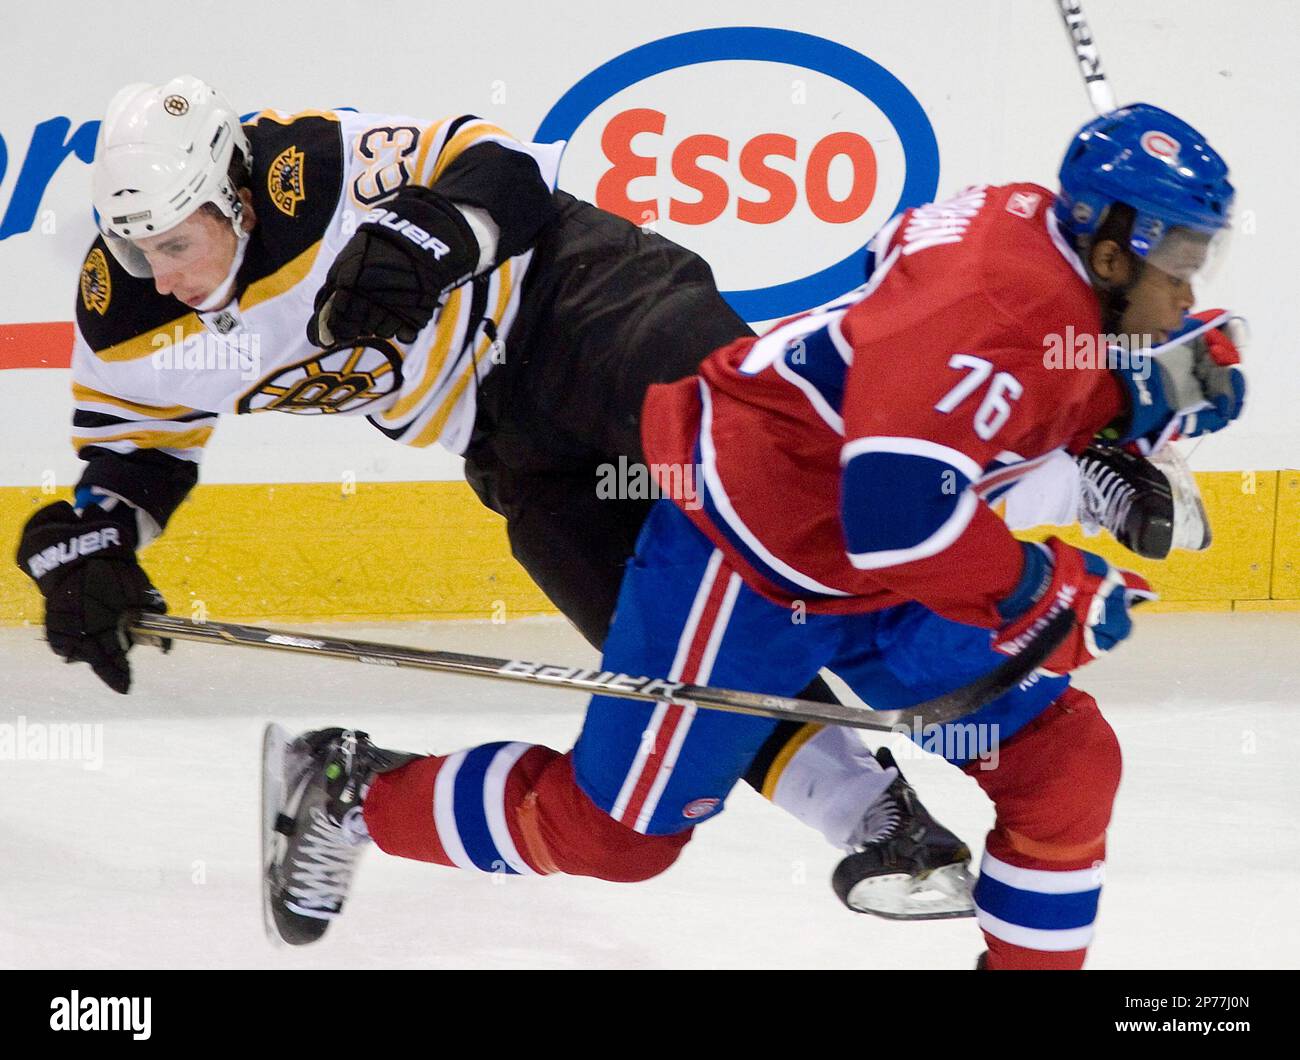 FILE - In this Dec. 16, 2010, file photo, Montreal Canadiens' P.K. Subban, right, collides with Boston Bruins' Brad Marchand during an NHL hockey game in Montreal. If there was one Montreal Canadien who got under the Boston Bruins' skin this season, it was Subban. So the rookie defenseman, who is chatty both on and off the ice, will be a likely target for the Bruins when they bring their physical style to the 33rd postseason matchup between the Original Six clubs. (AP Photo/The Canadian Press, Graham Hughes, File) Banque D'Images